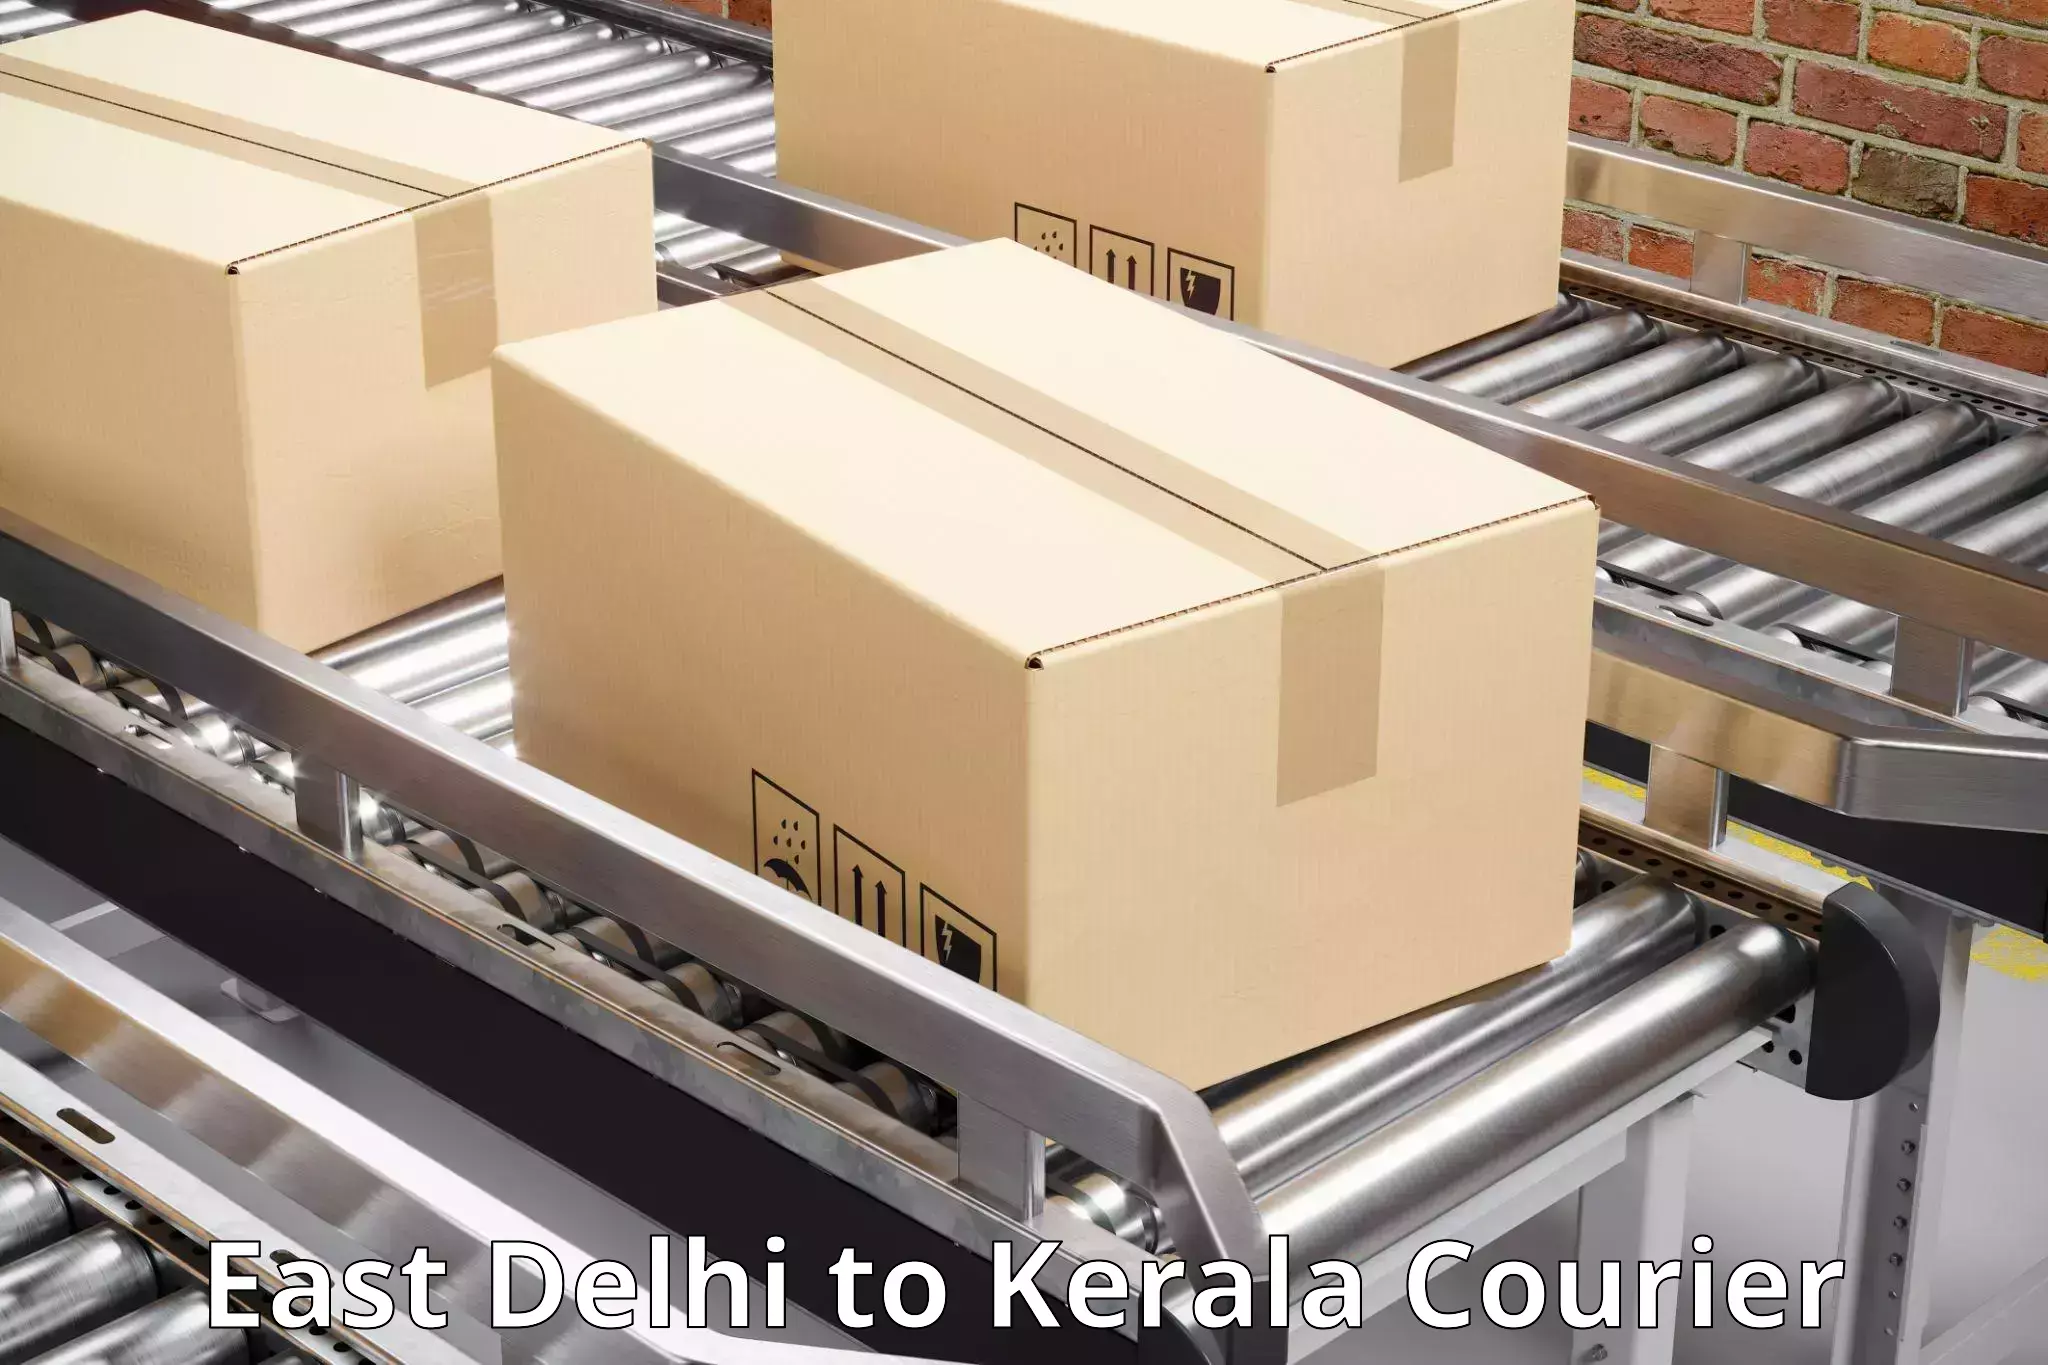 Package delivery network East Delhi to Mahe